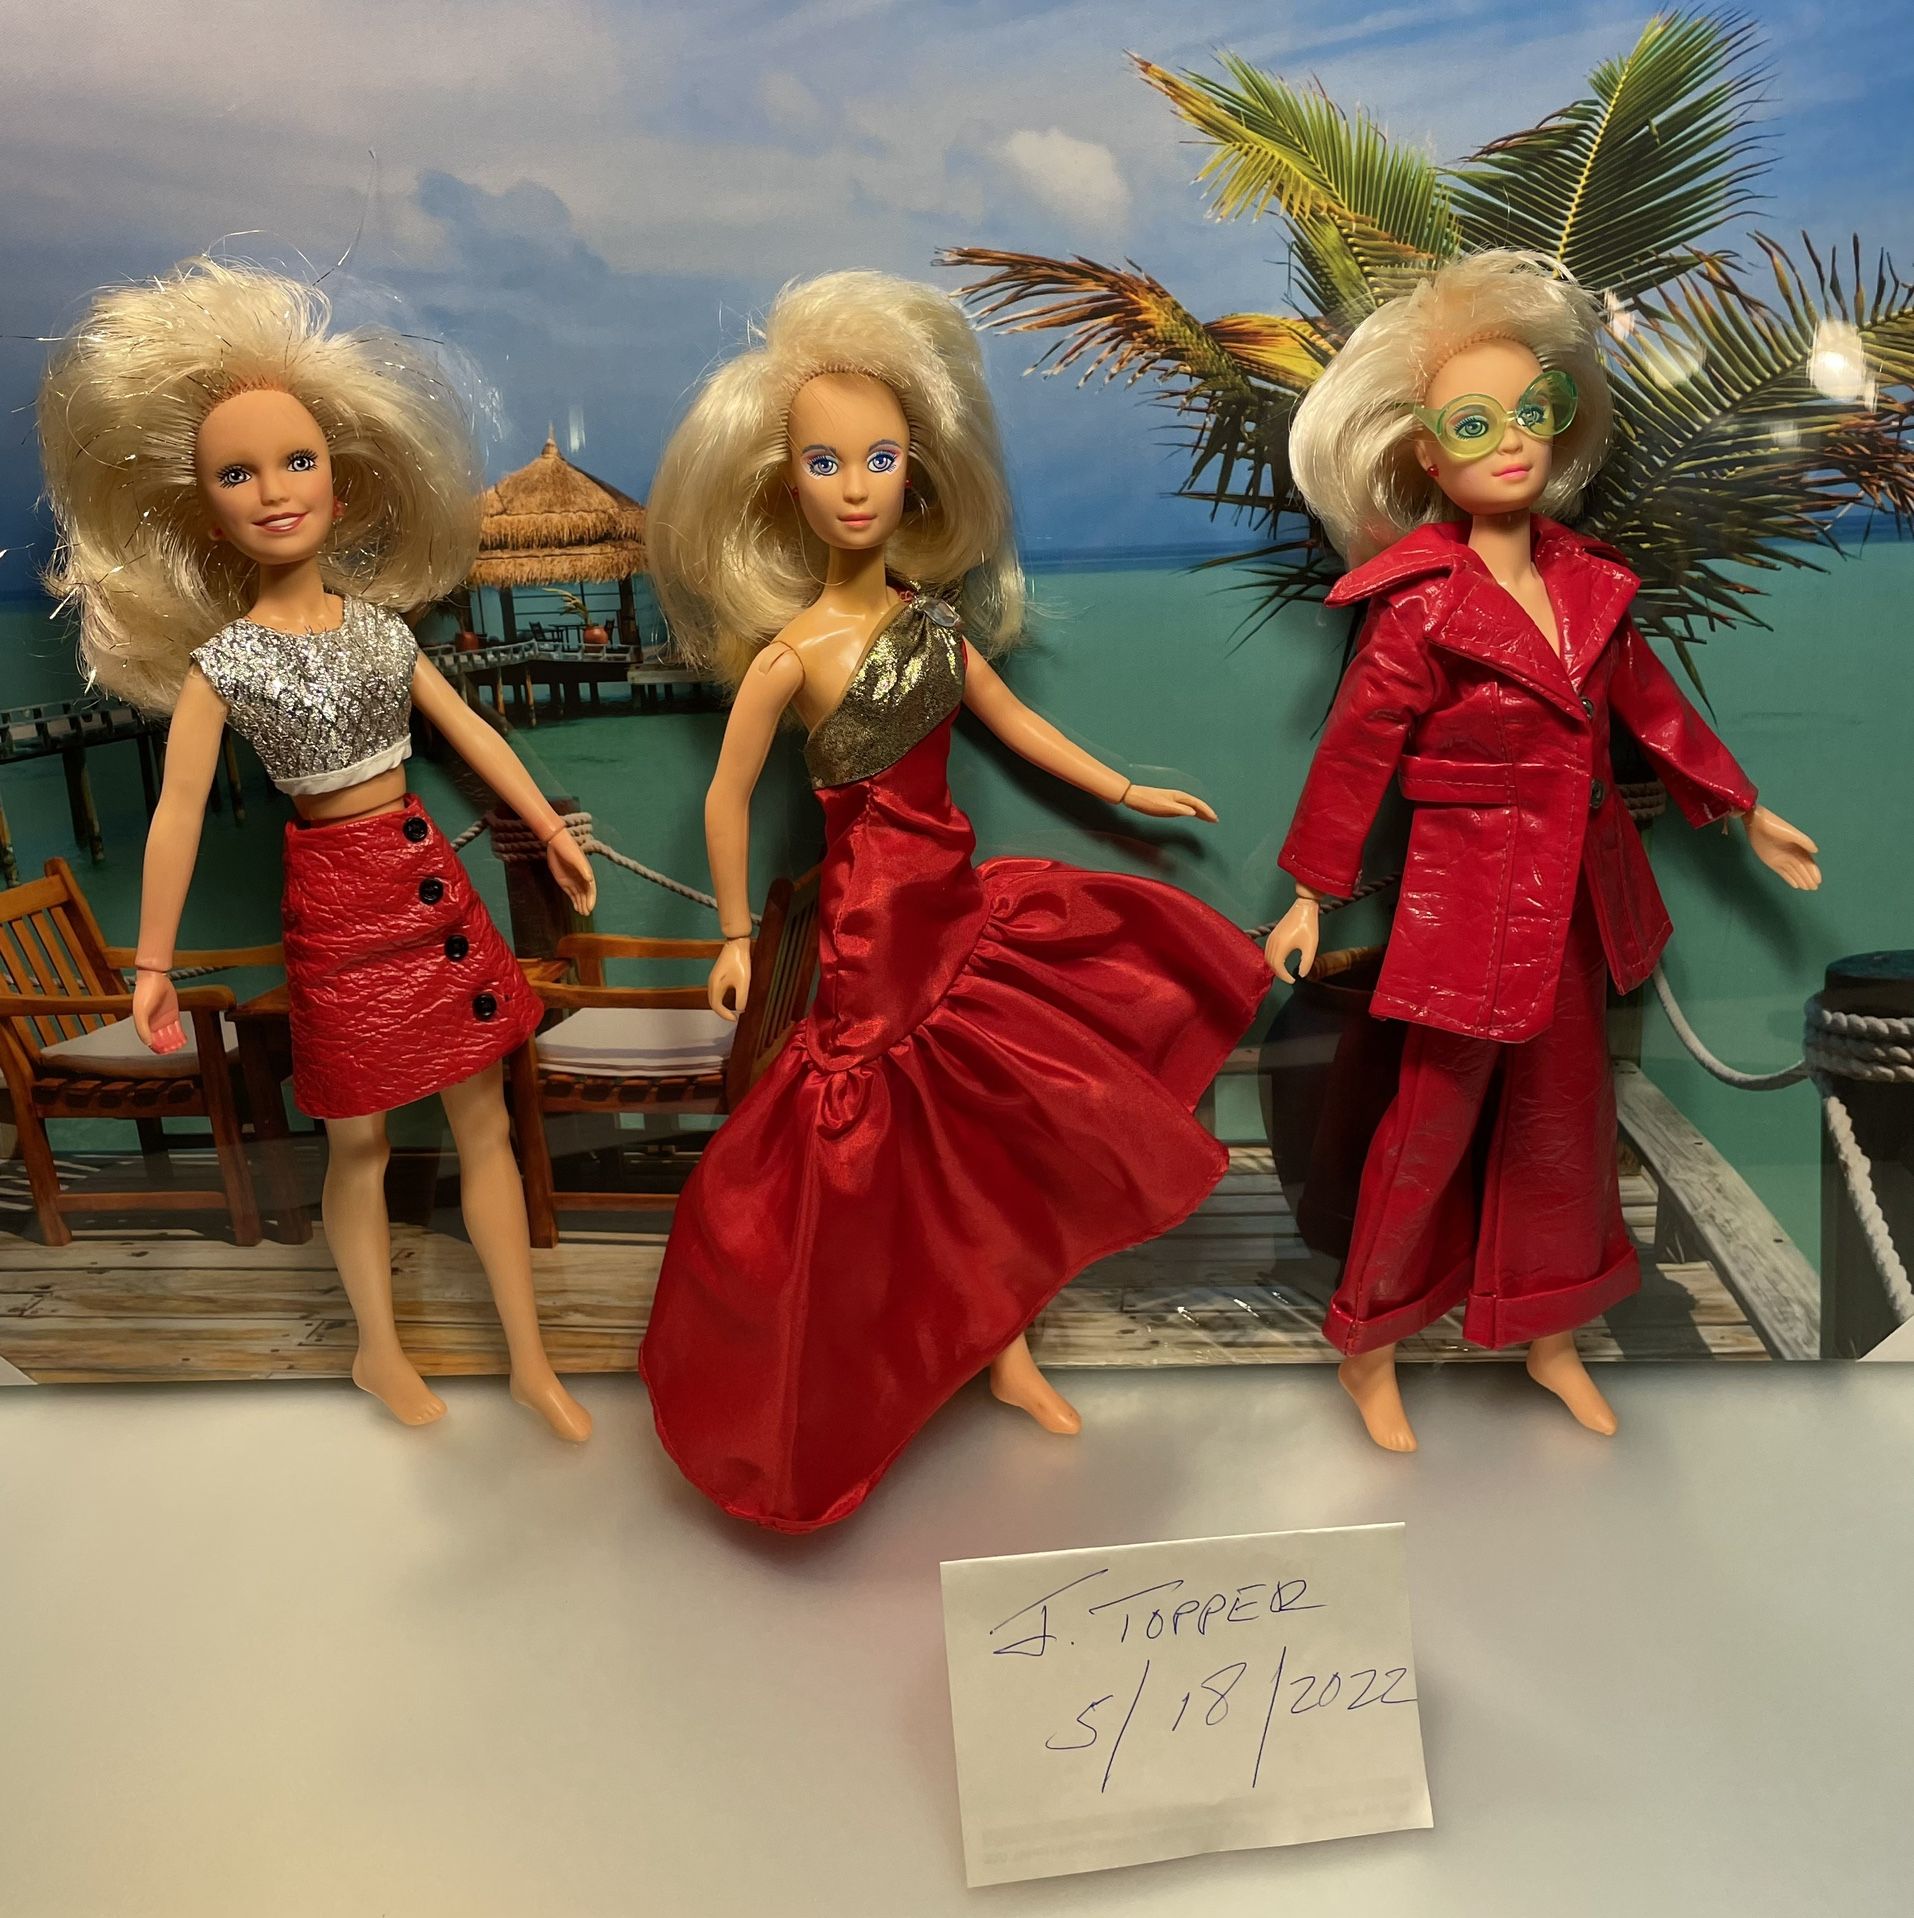 Collectible 1980s Jem Dolls